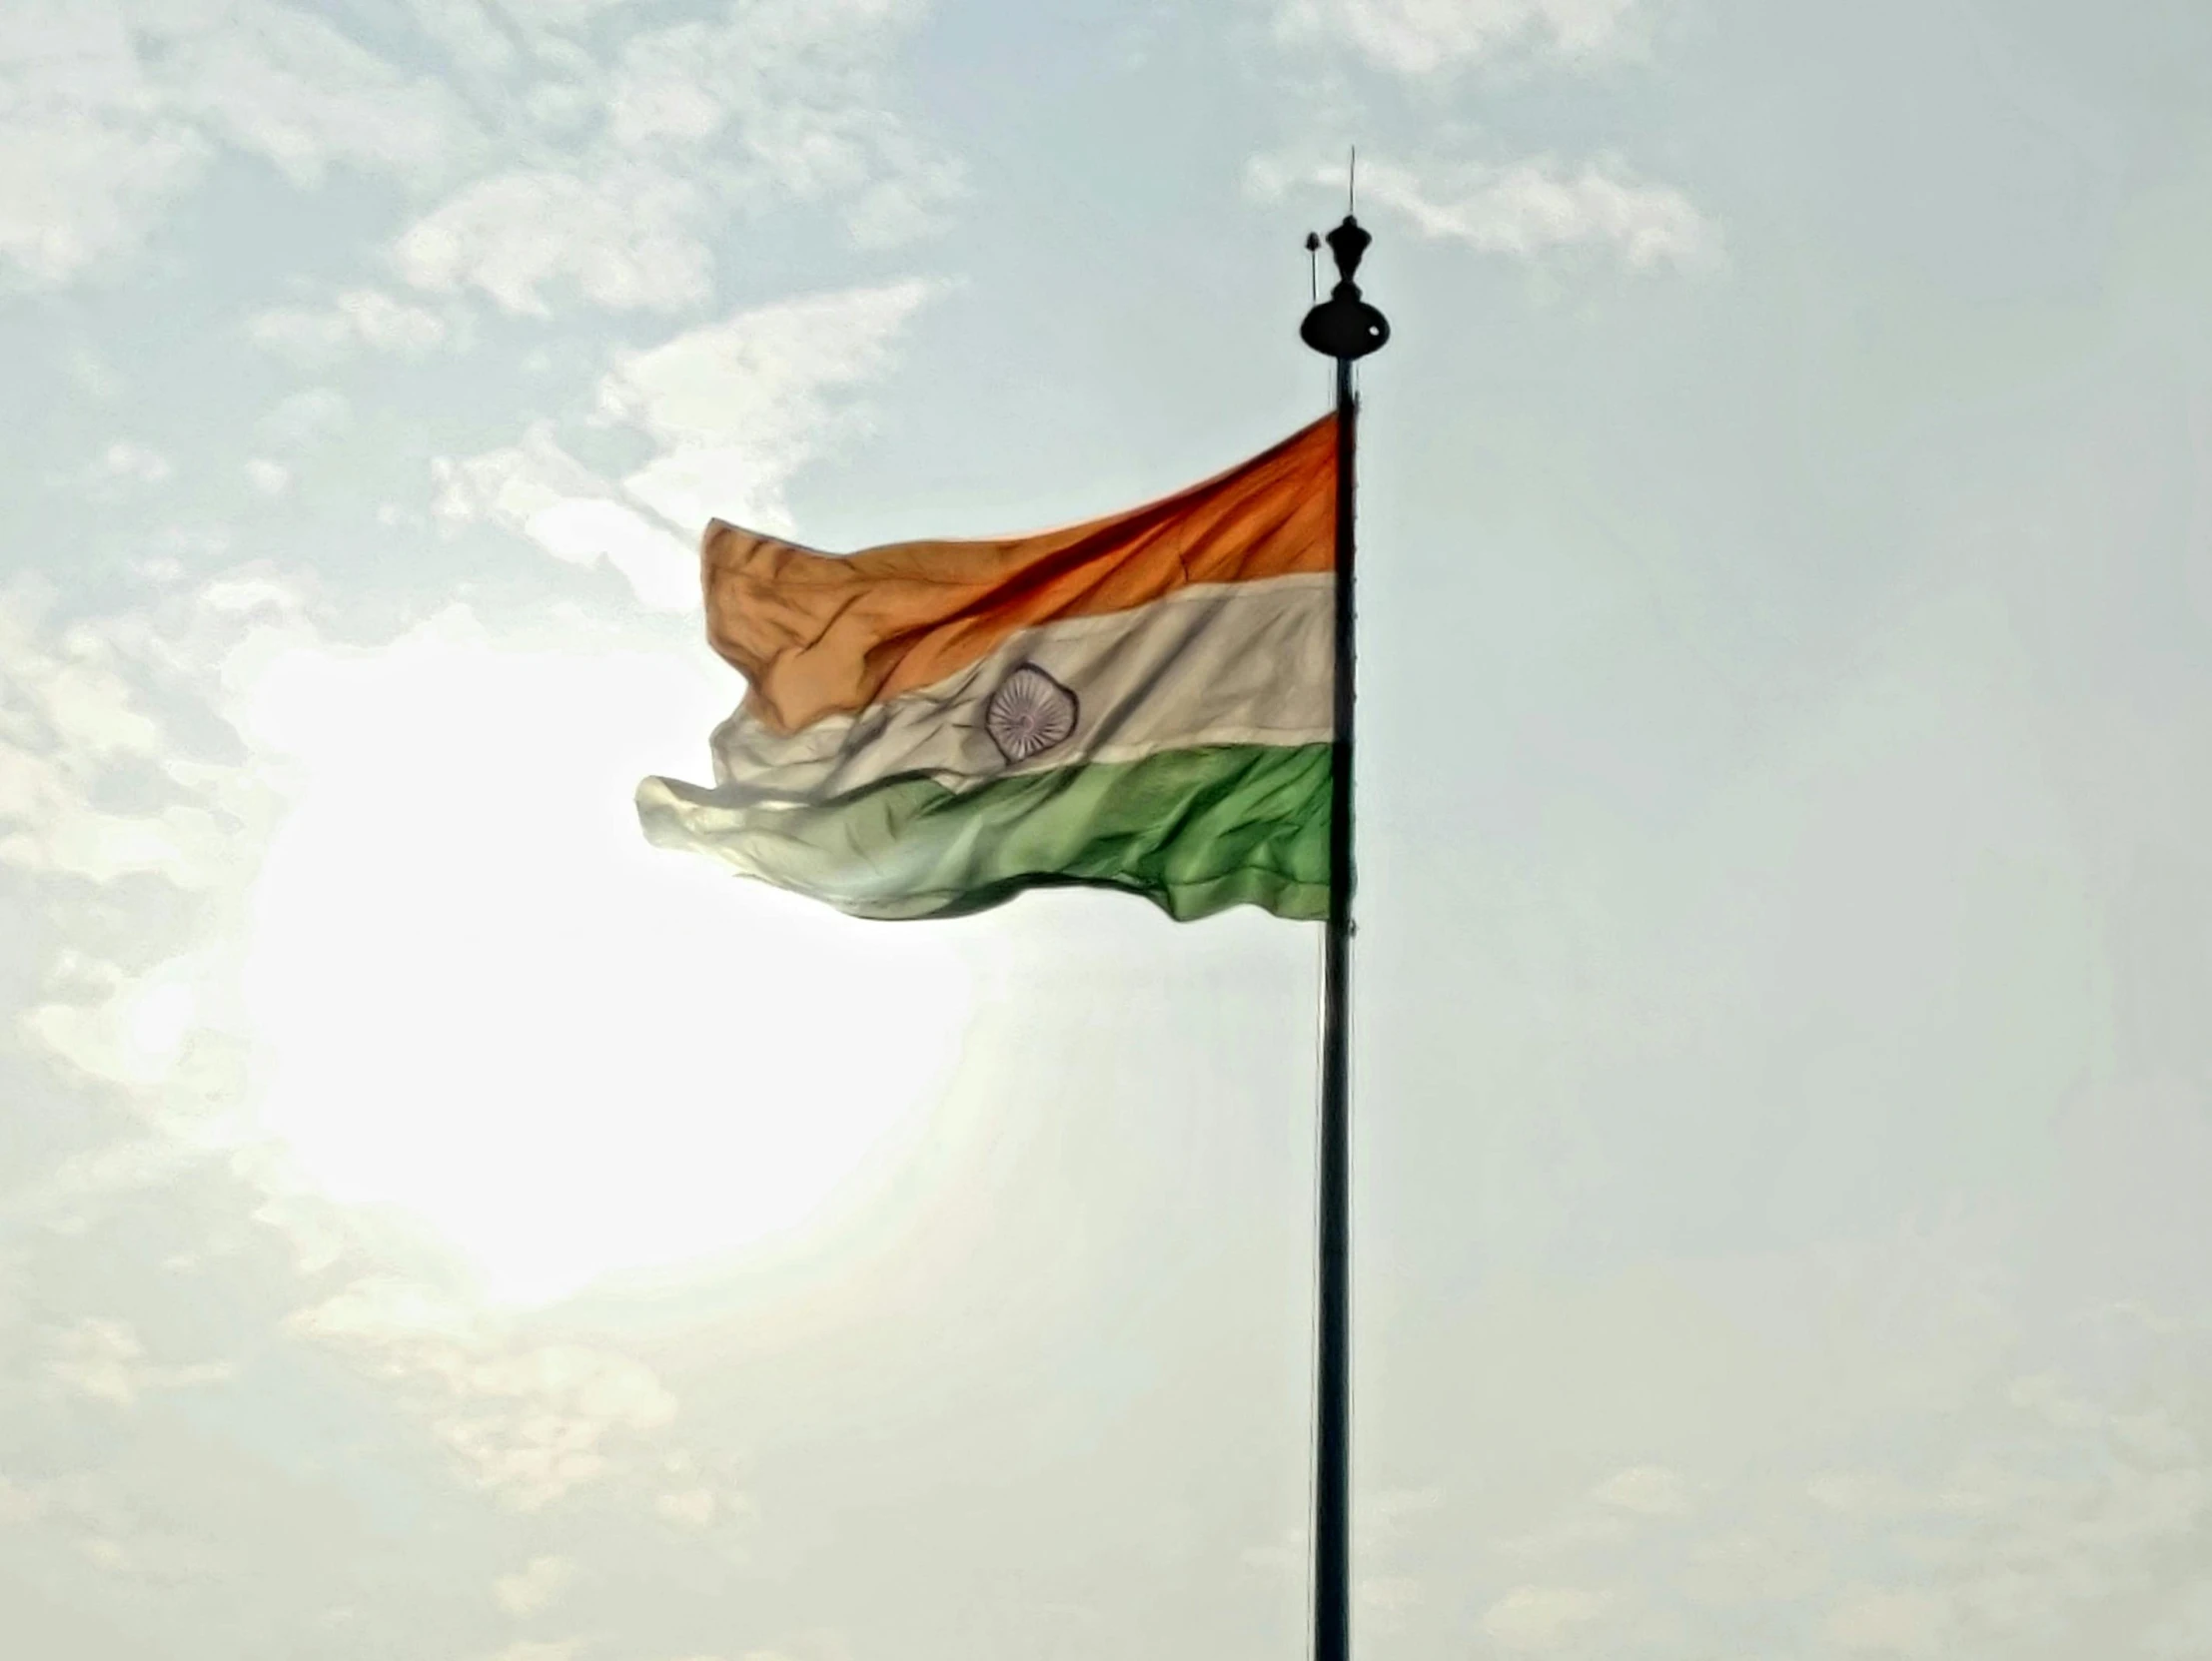 the indian flag is flying on a pole against a blue sky